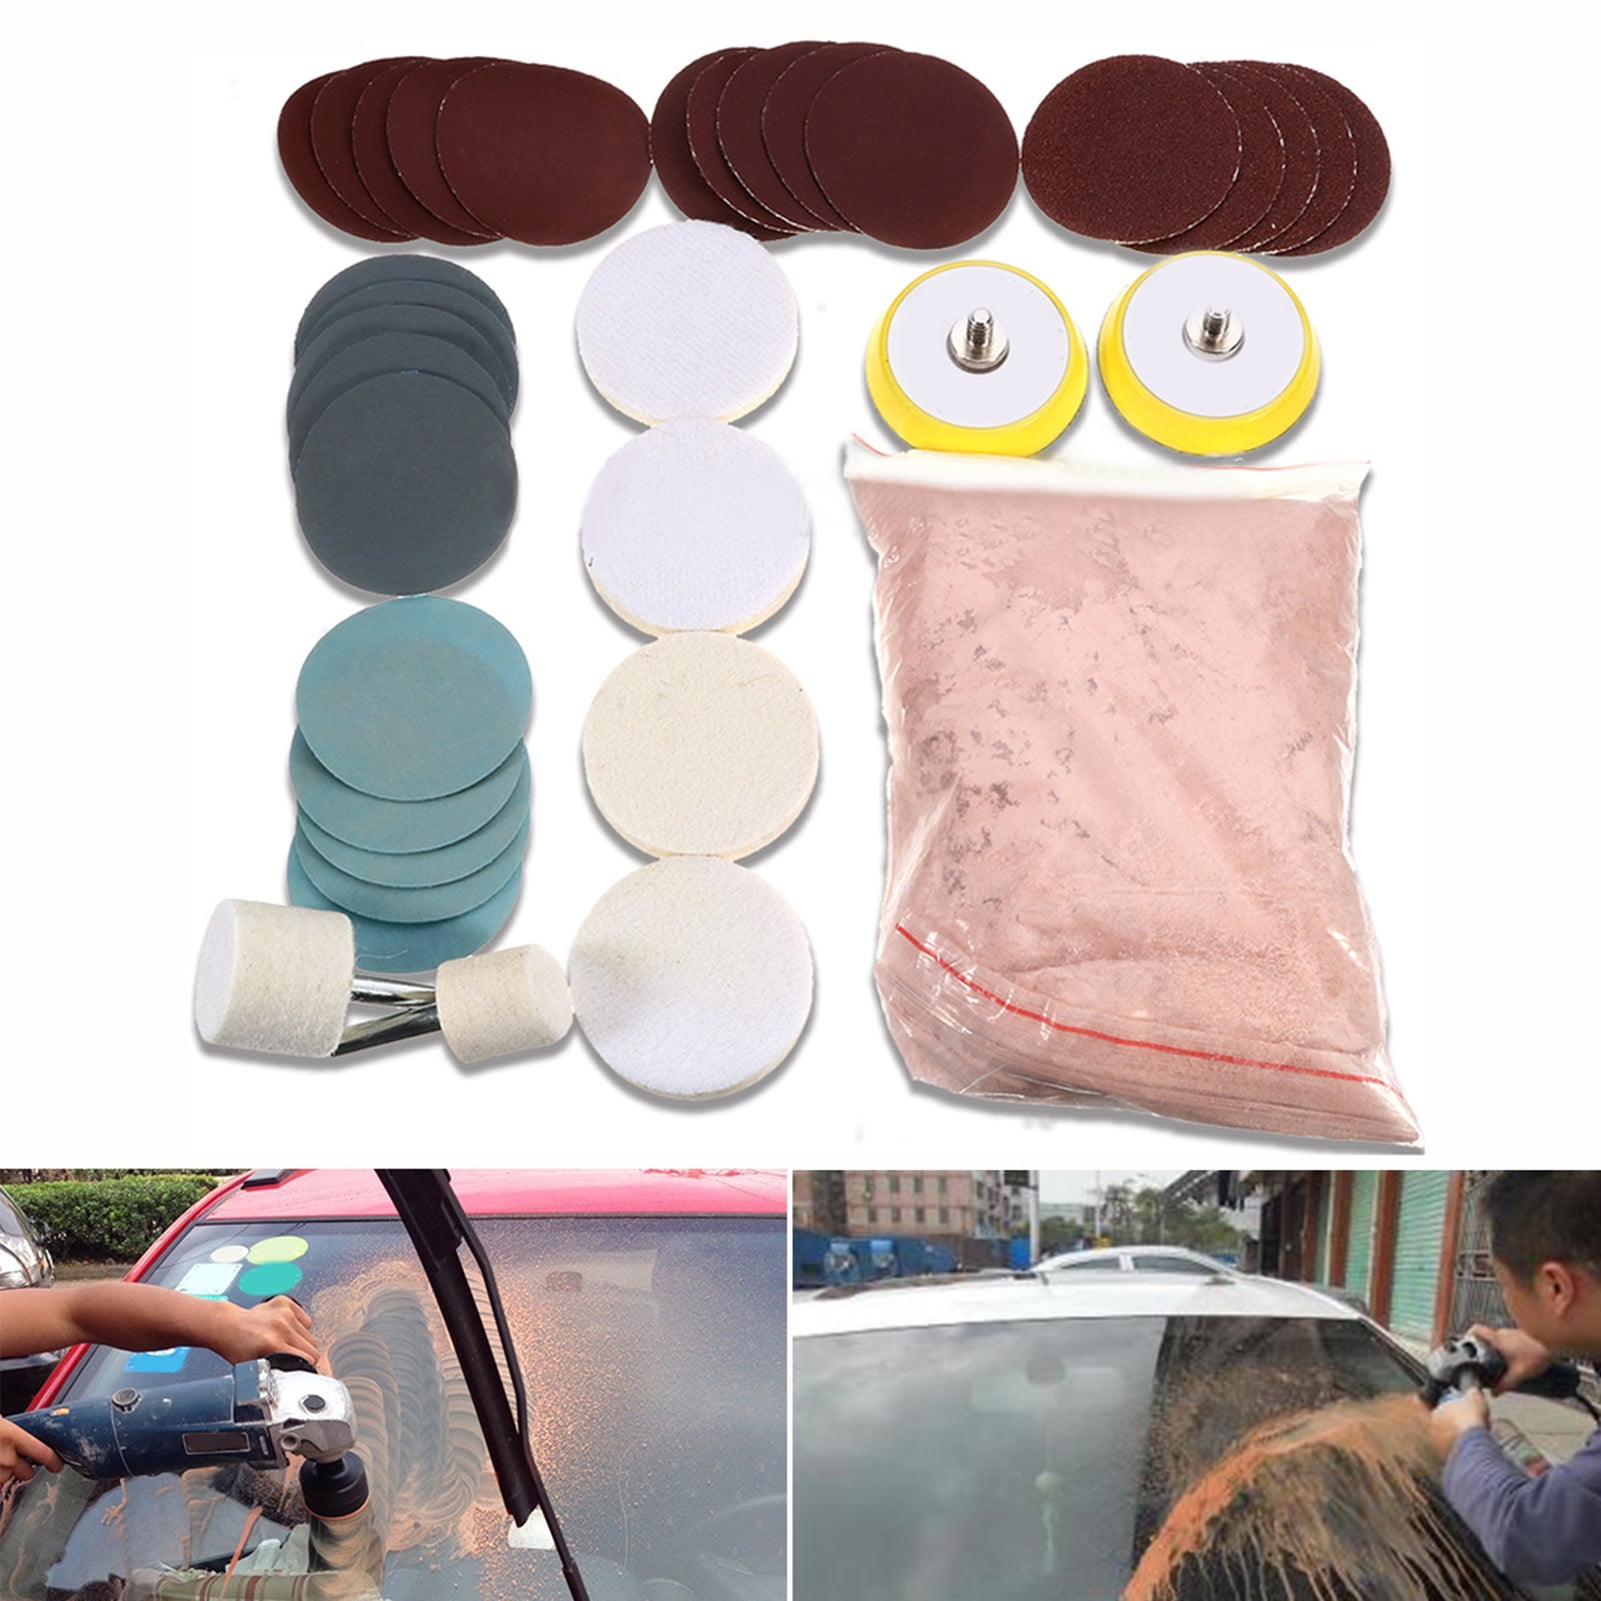 SDJMa Repair Polishing Wax Kit Sponge Body Compound Scratch Remover Vehicle  Paint Scratch Repair Auto Paint Scratch Remover Kit Car Scratch Repair